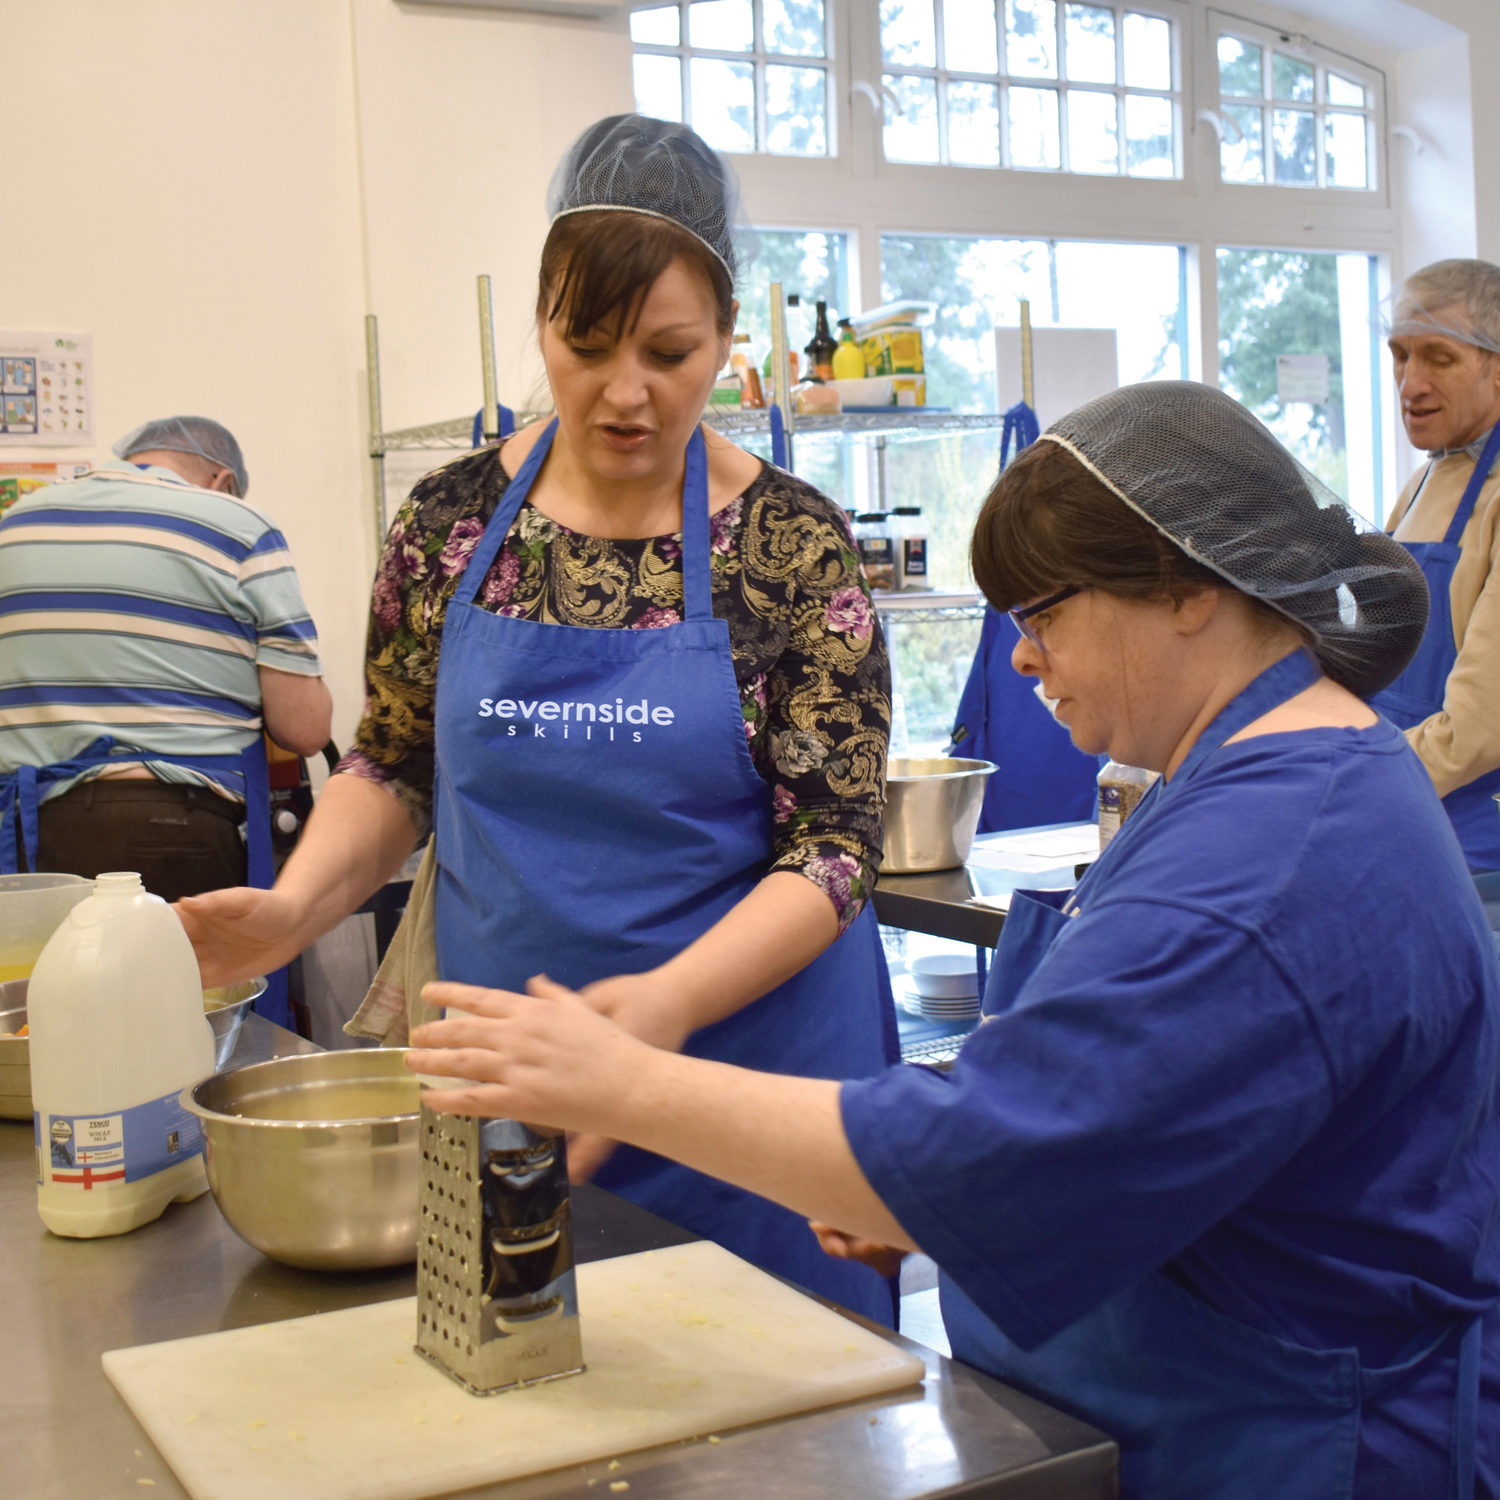 Catering course with Severnside Skills at Taurus Crafts, Camphill Village Trust